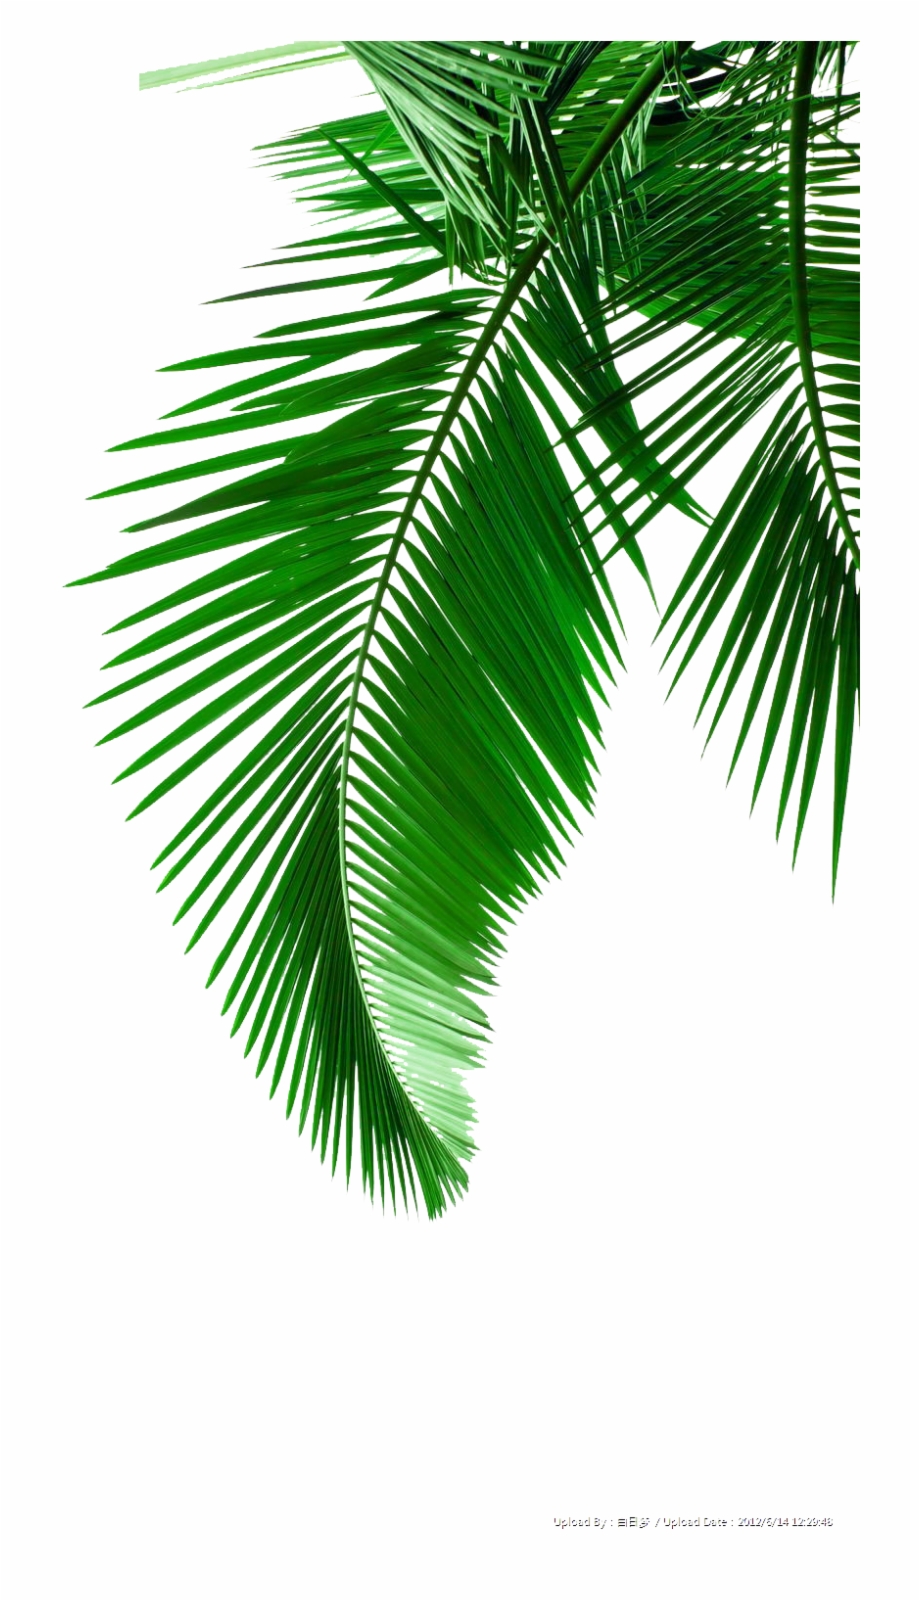 green and white background
